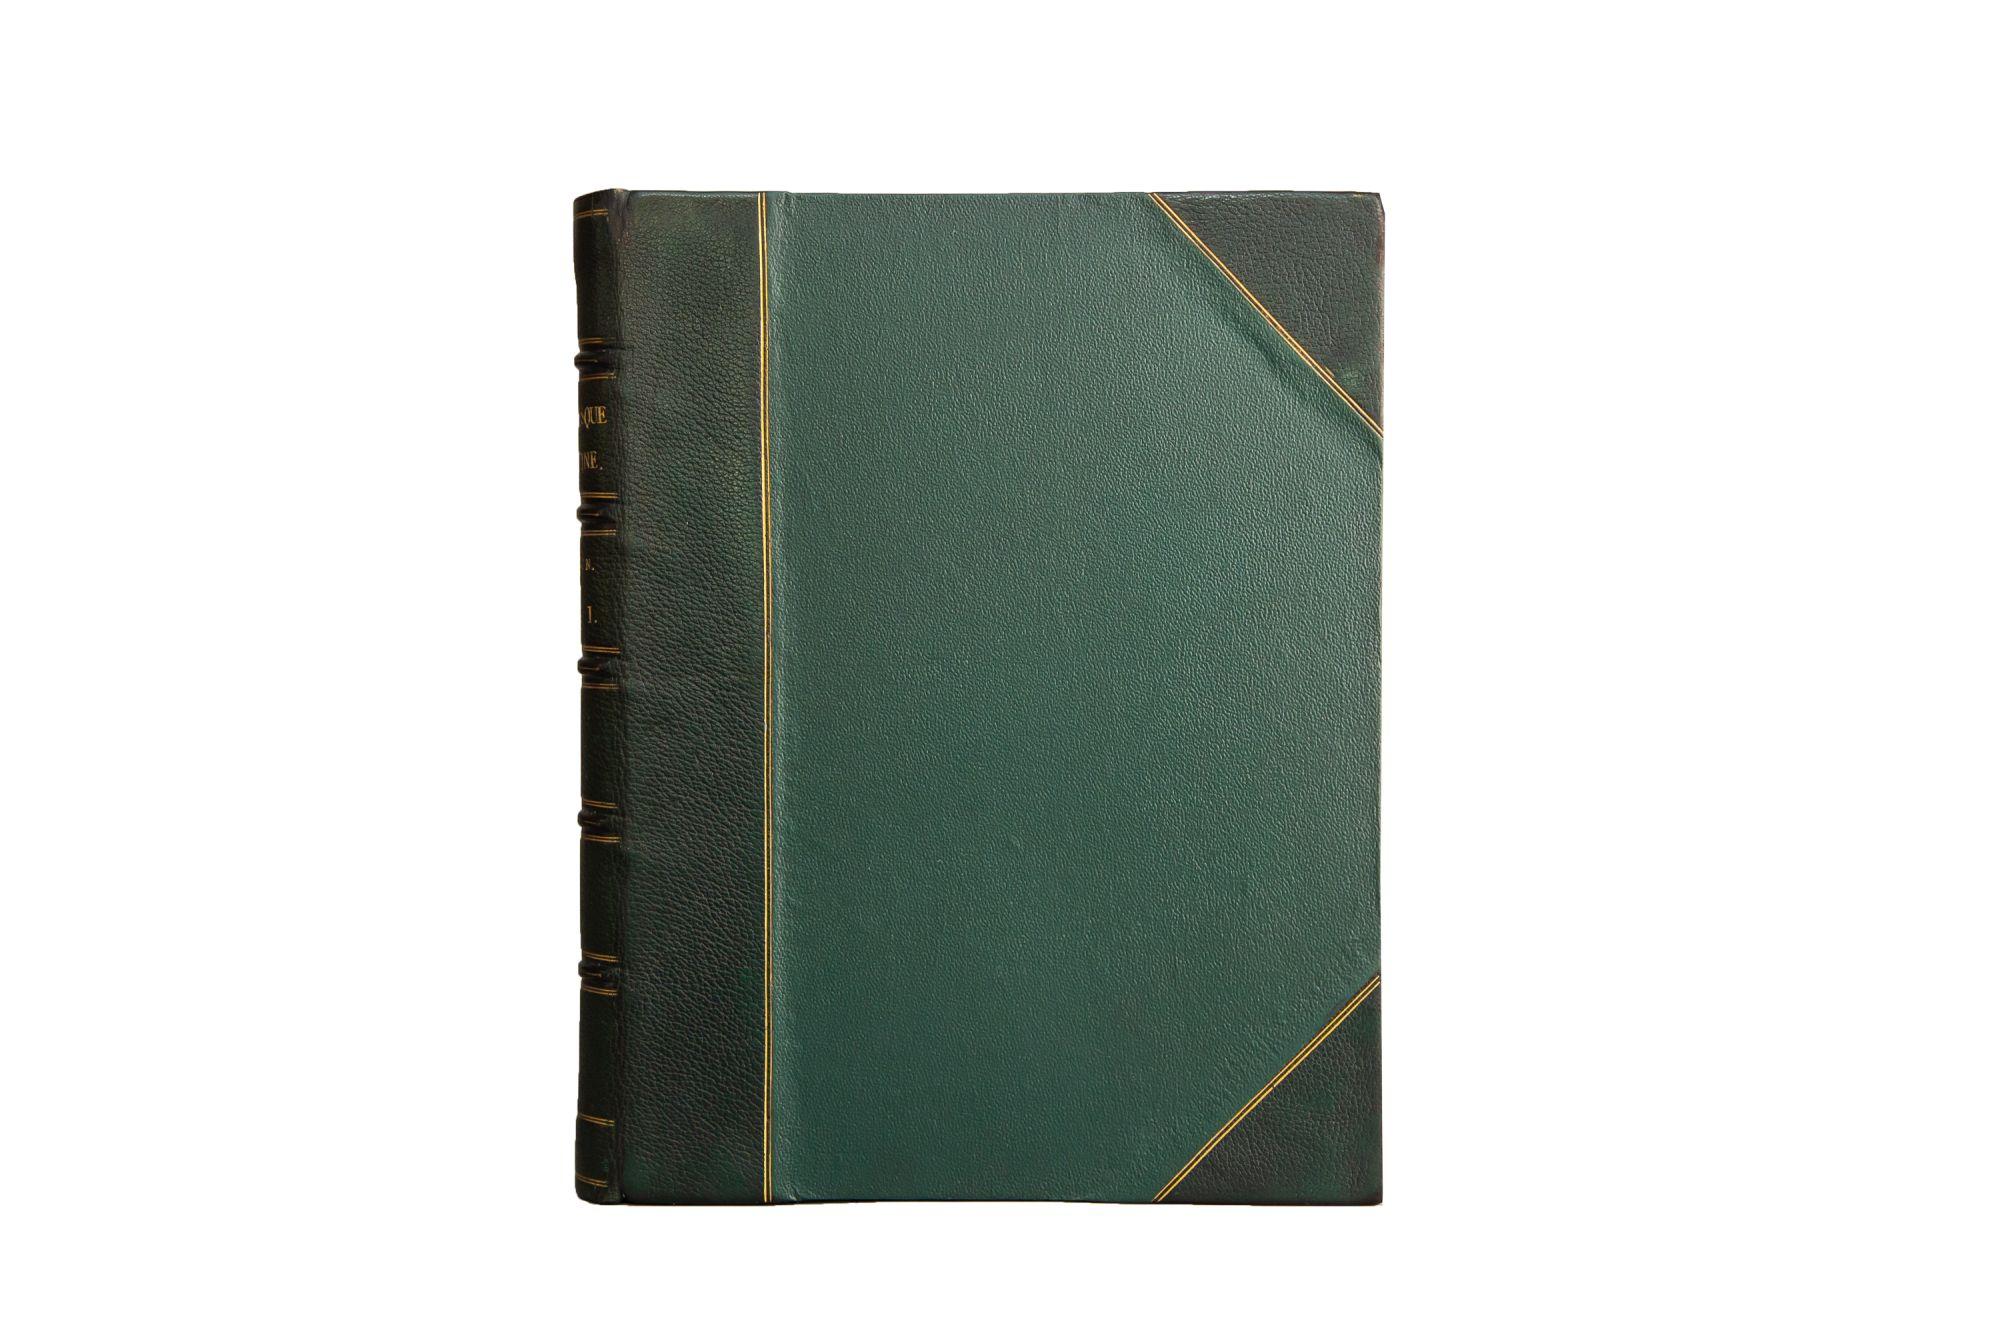 4 Volumes. Colonel Wilson, R.E., C.B., F.R.S., Picturesque Palestine, Sinai, and Egypt. Bound in 3/4 green morocco and linen boards, bordered in gilt. Raised band spines with gilt detailing. Top edge gilt with marbled endpapers. Assisted by the most